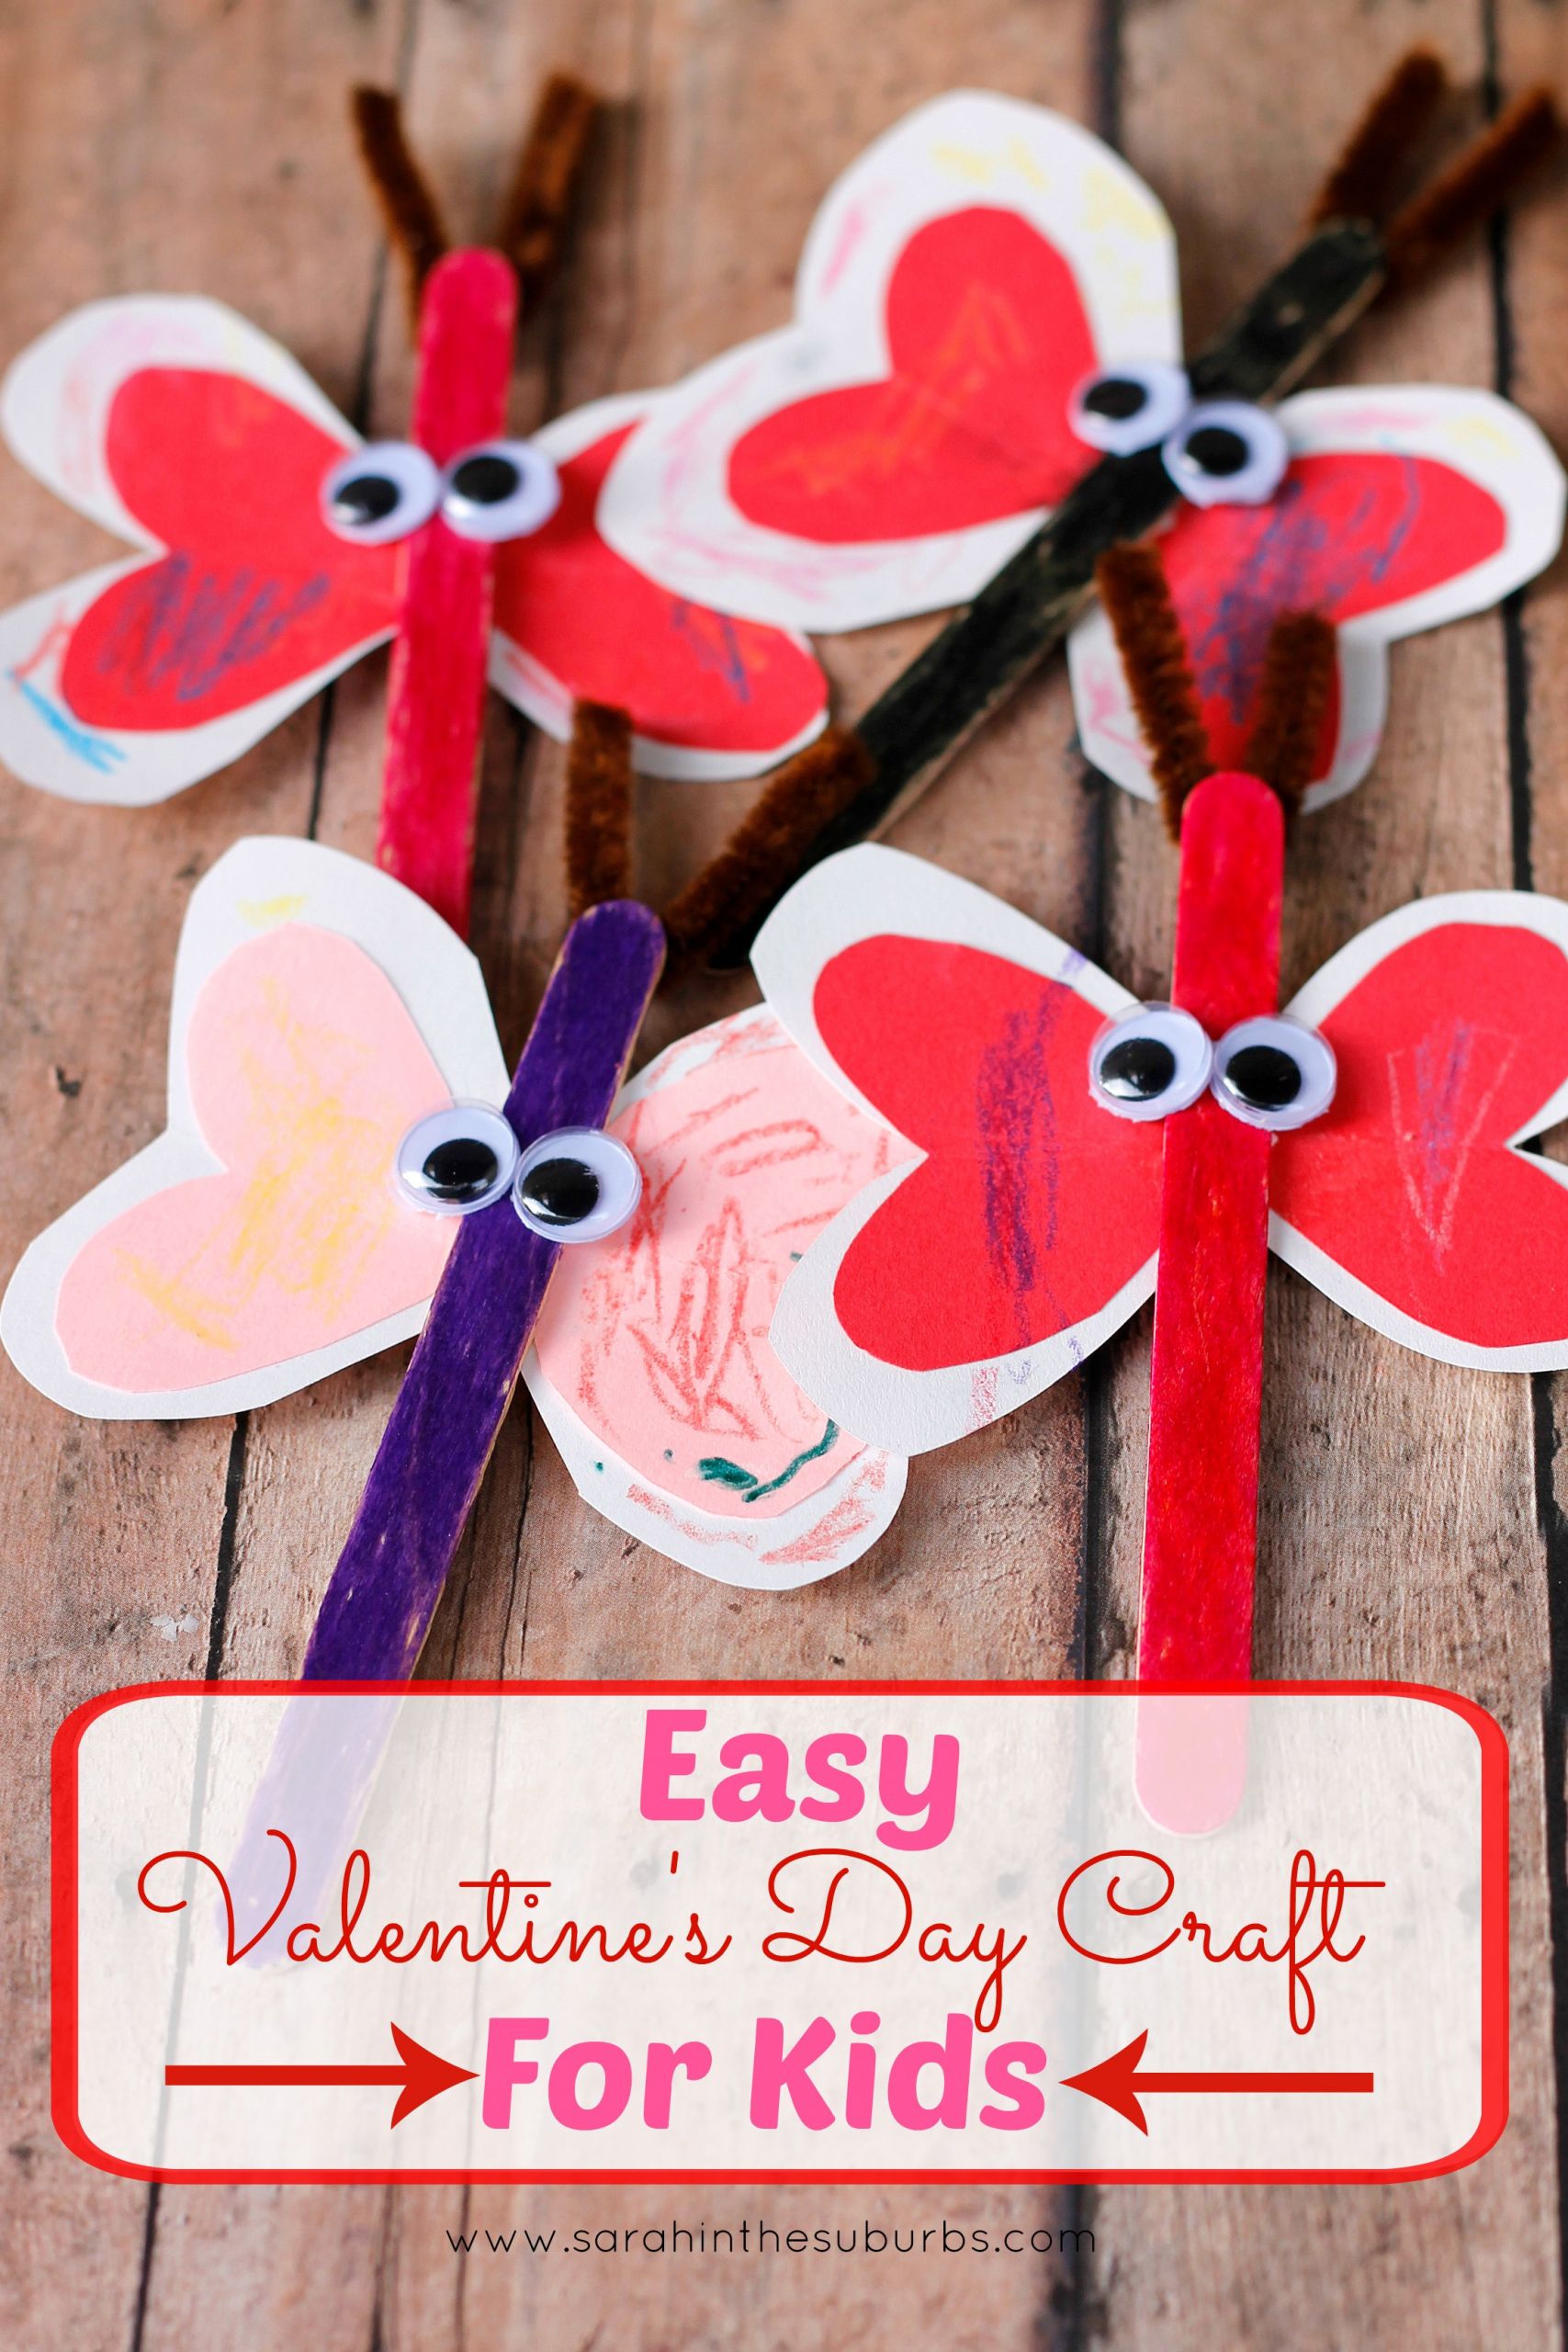 Simple Projects For Kids
 Easy Valentine s Day Craft for Kids Sarah in the Suburbs